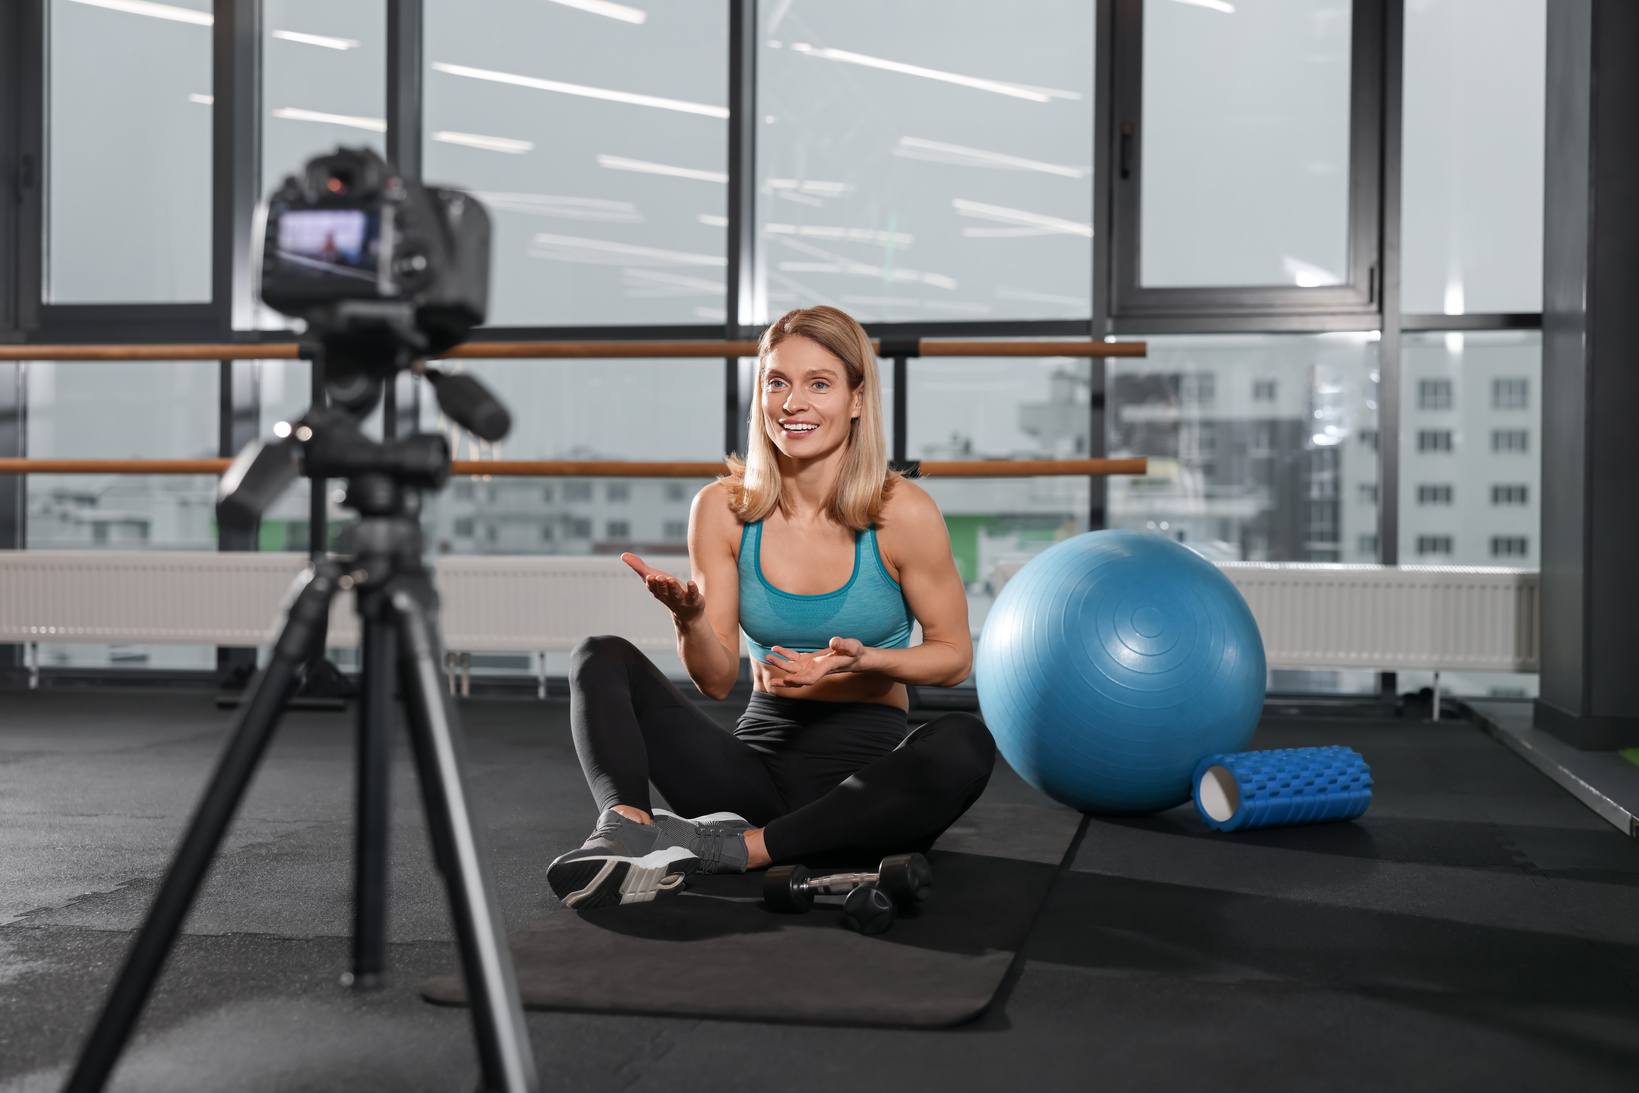 Fitness Trainer Recording Online Classes in Gym